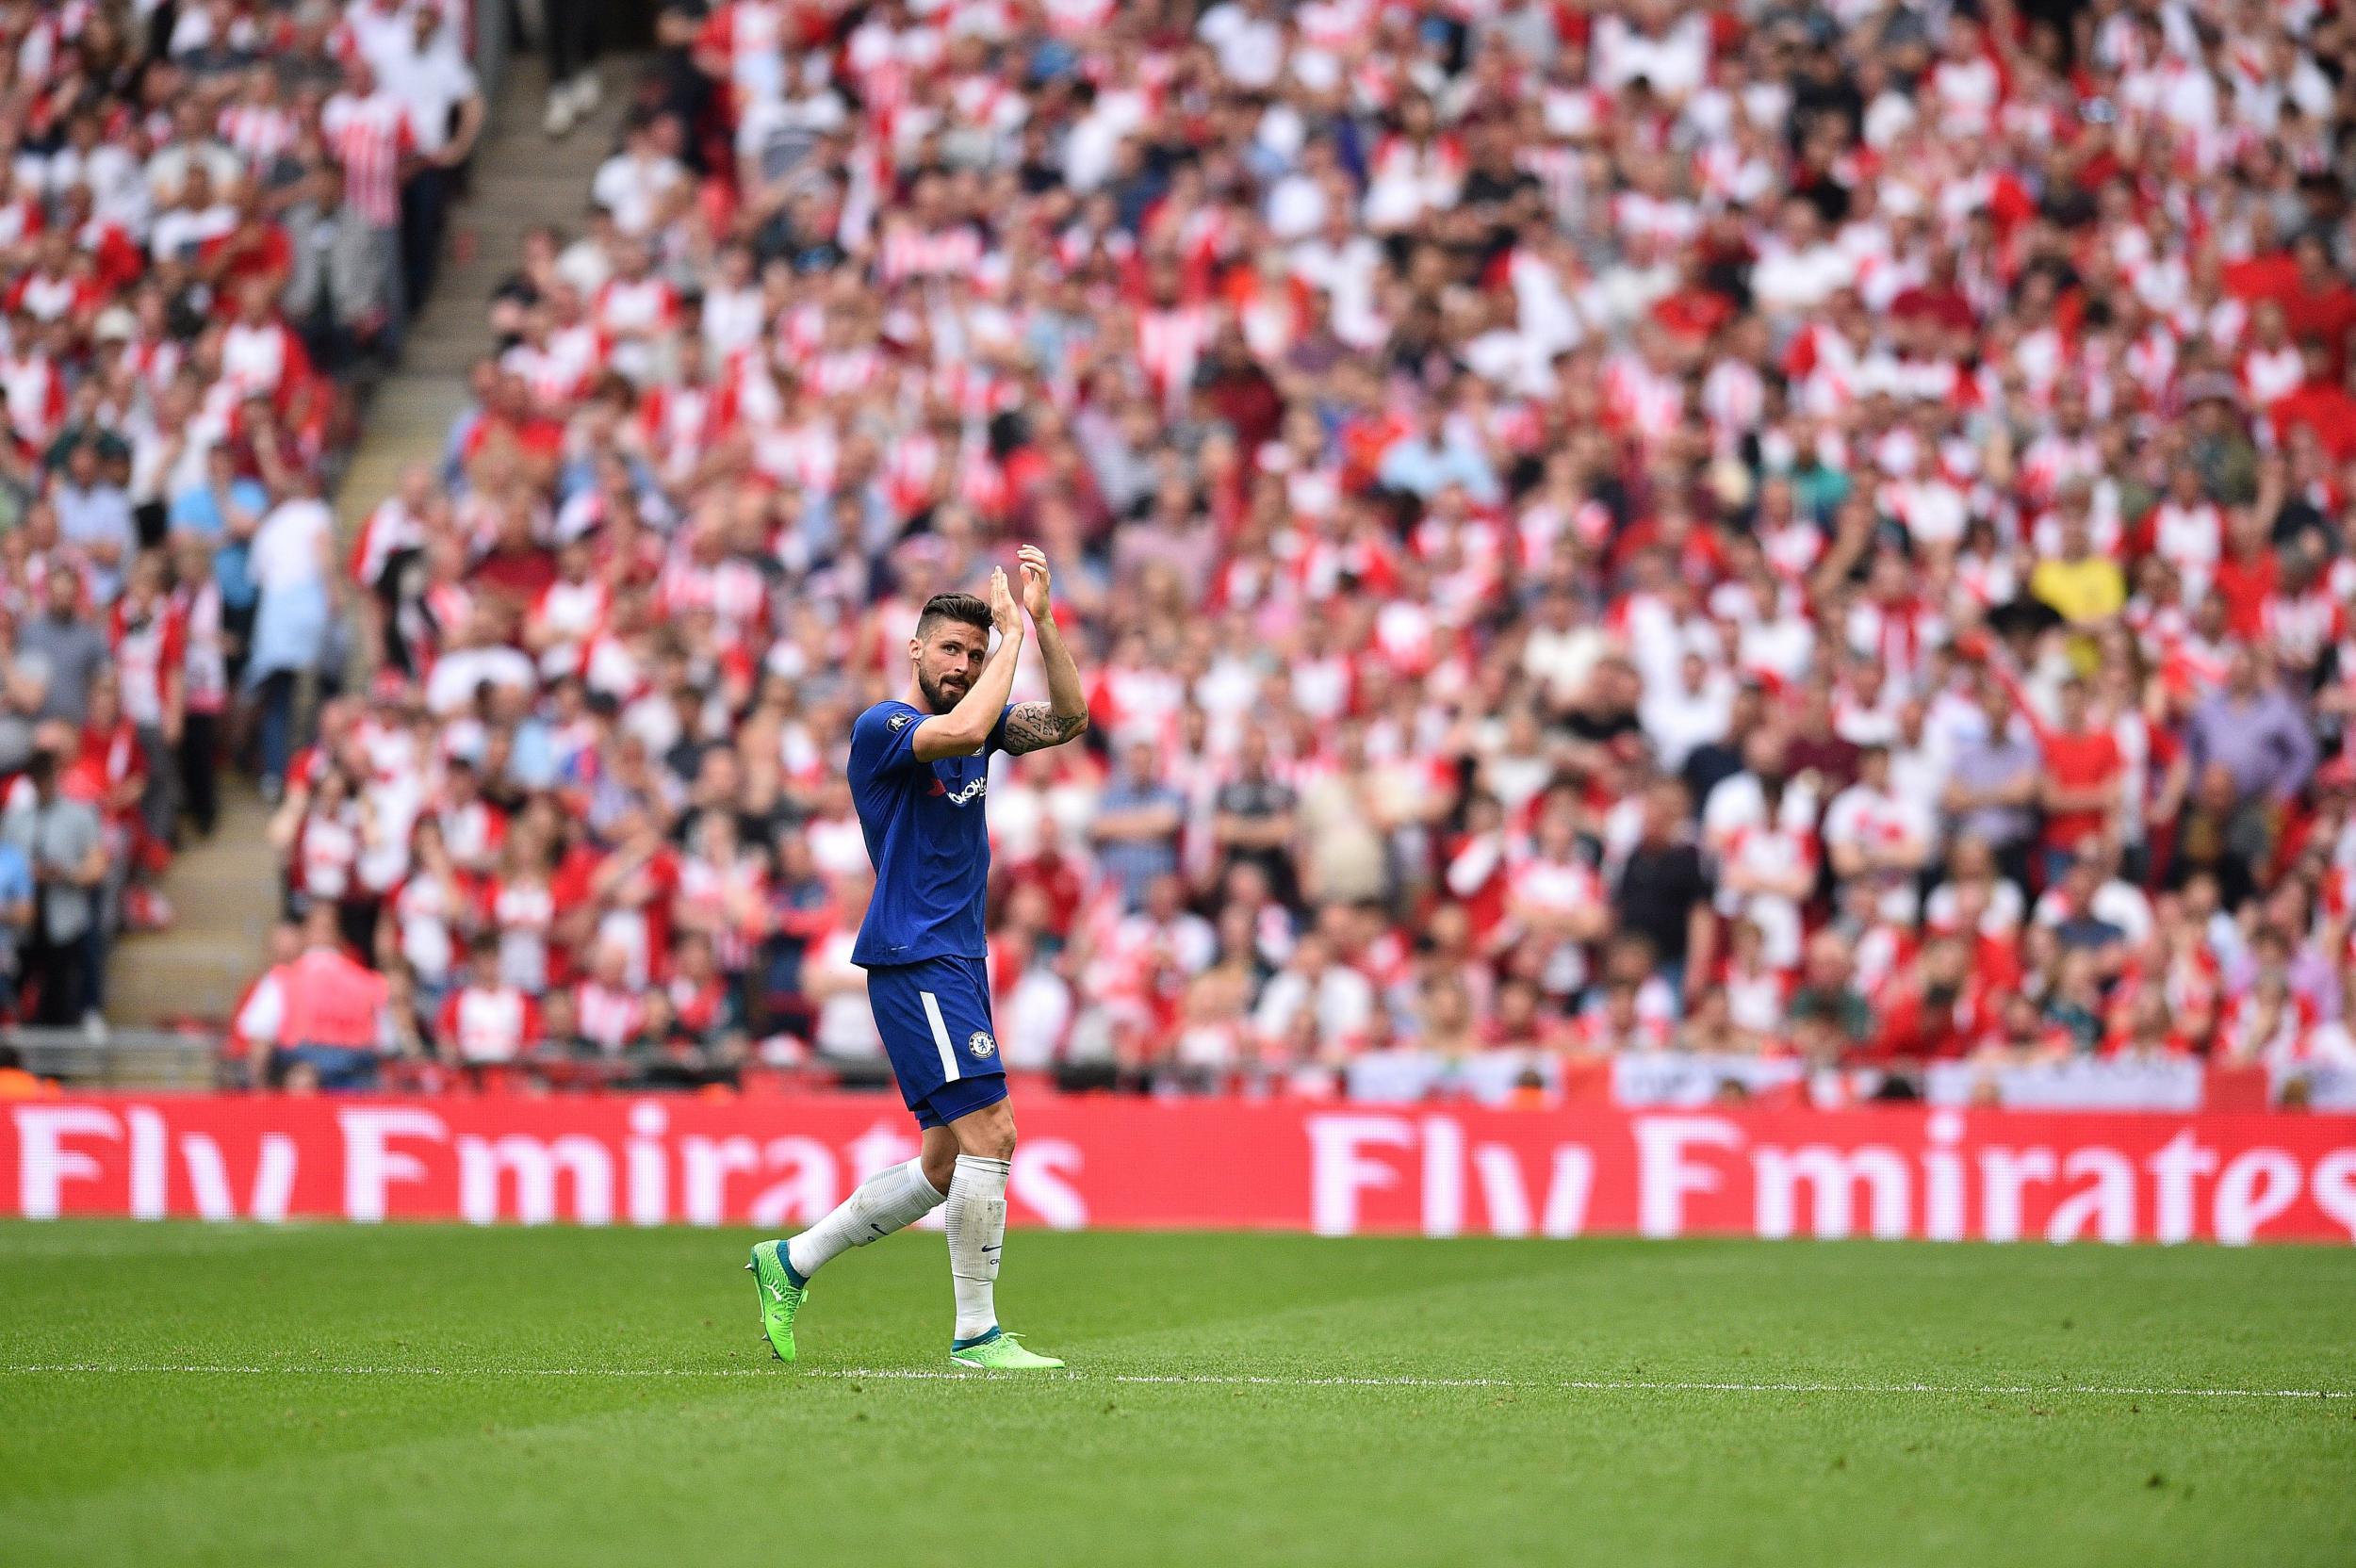 Olivier Giroud played a key role in Chelsea’s FA Cup semi-final win